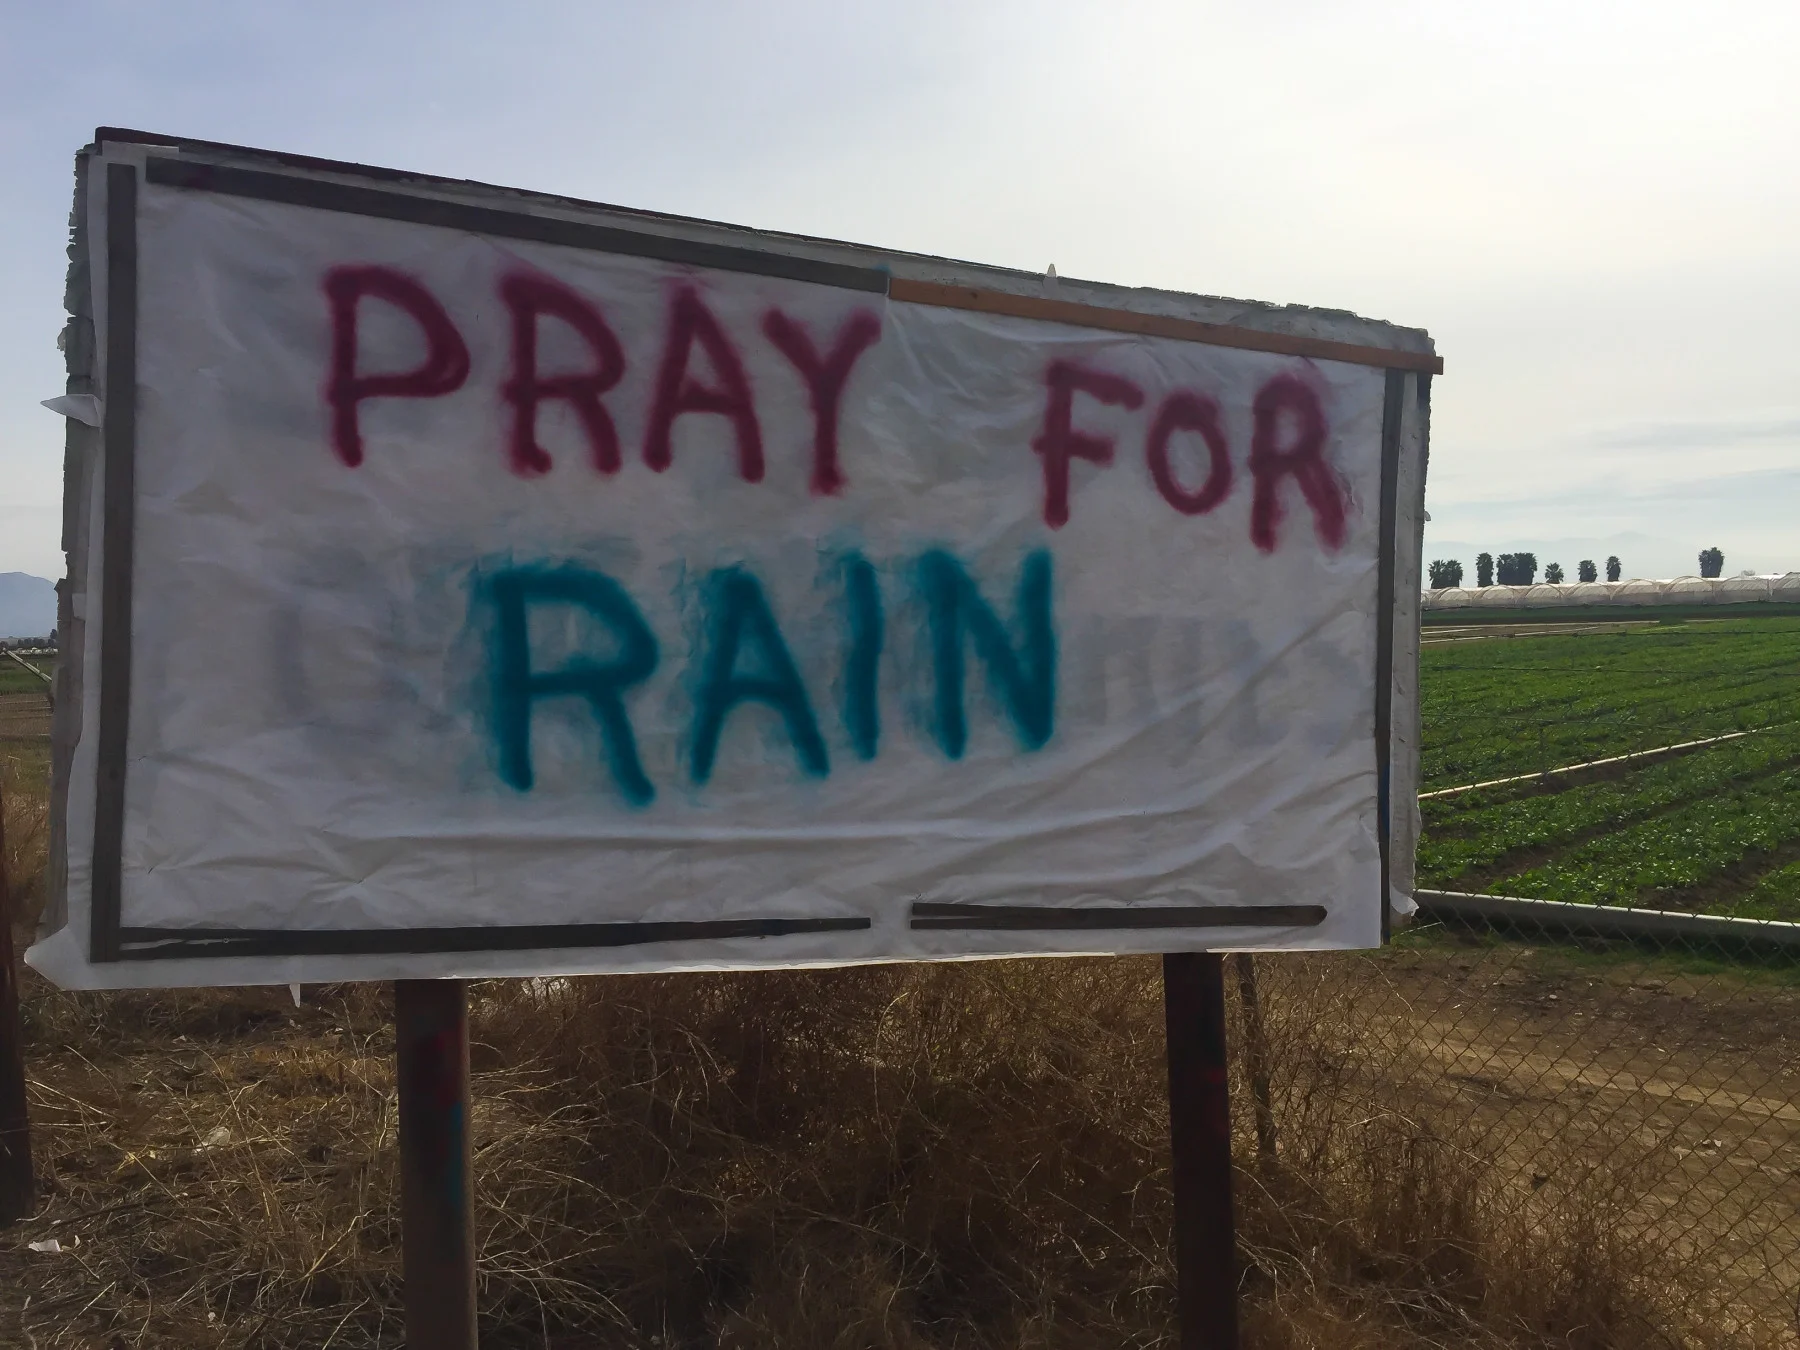 drought pray for rain sign in california (Patricia Marroquin/ Moment/ Getty Images)